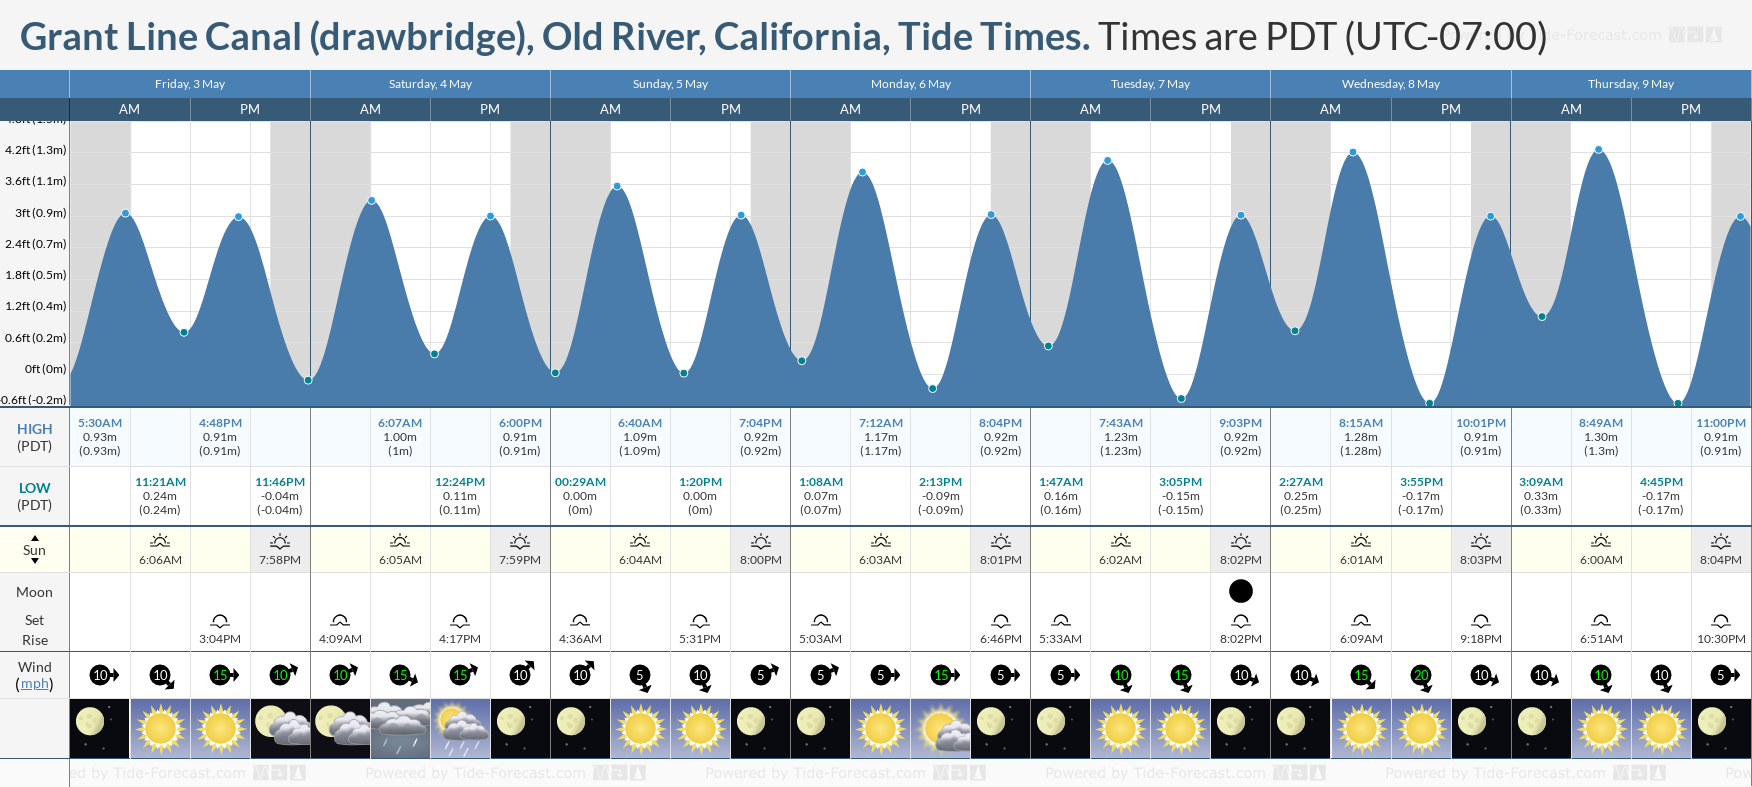 Grant Line Canal (drawbridge), Old River, California Tide Chart including high and low tide tide times for the next 7 days